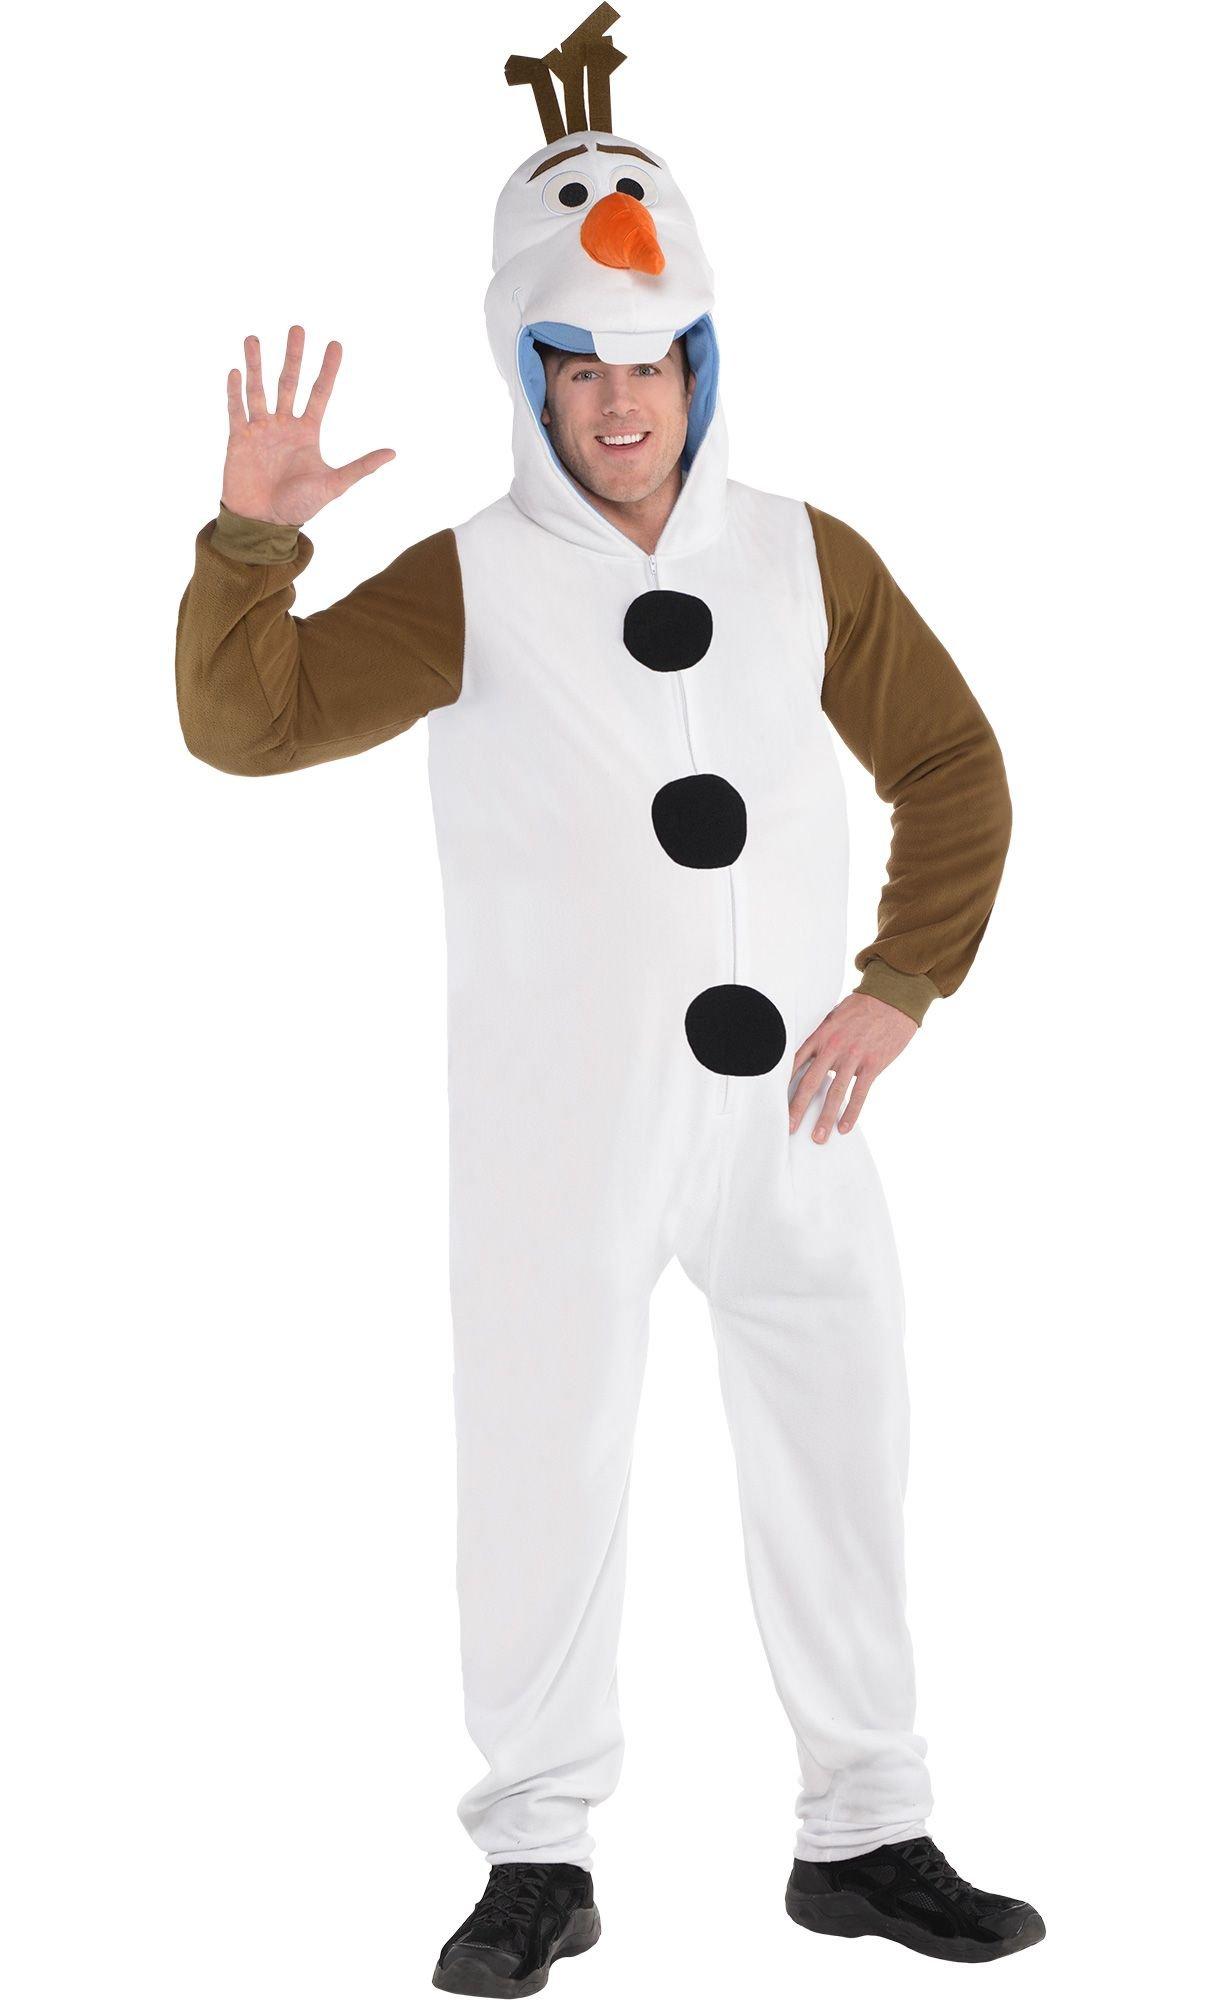 Adult Zipster Olaf One Piece Costume Plus Size - Frozen